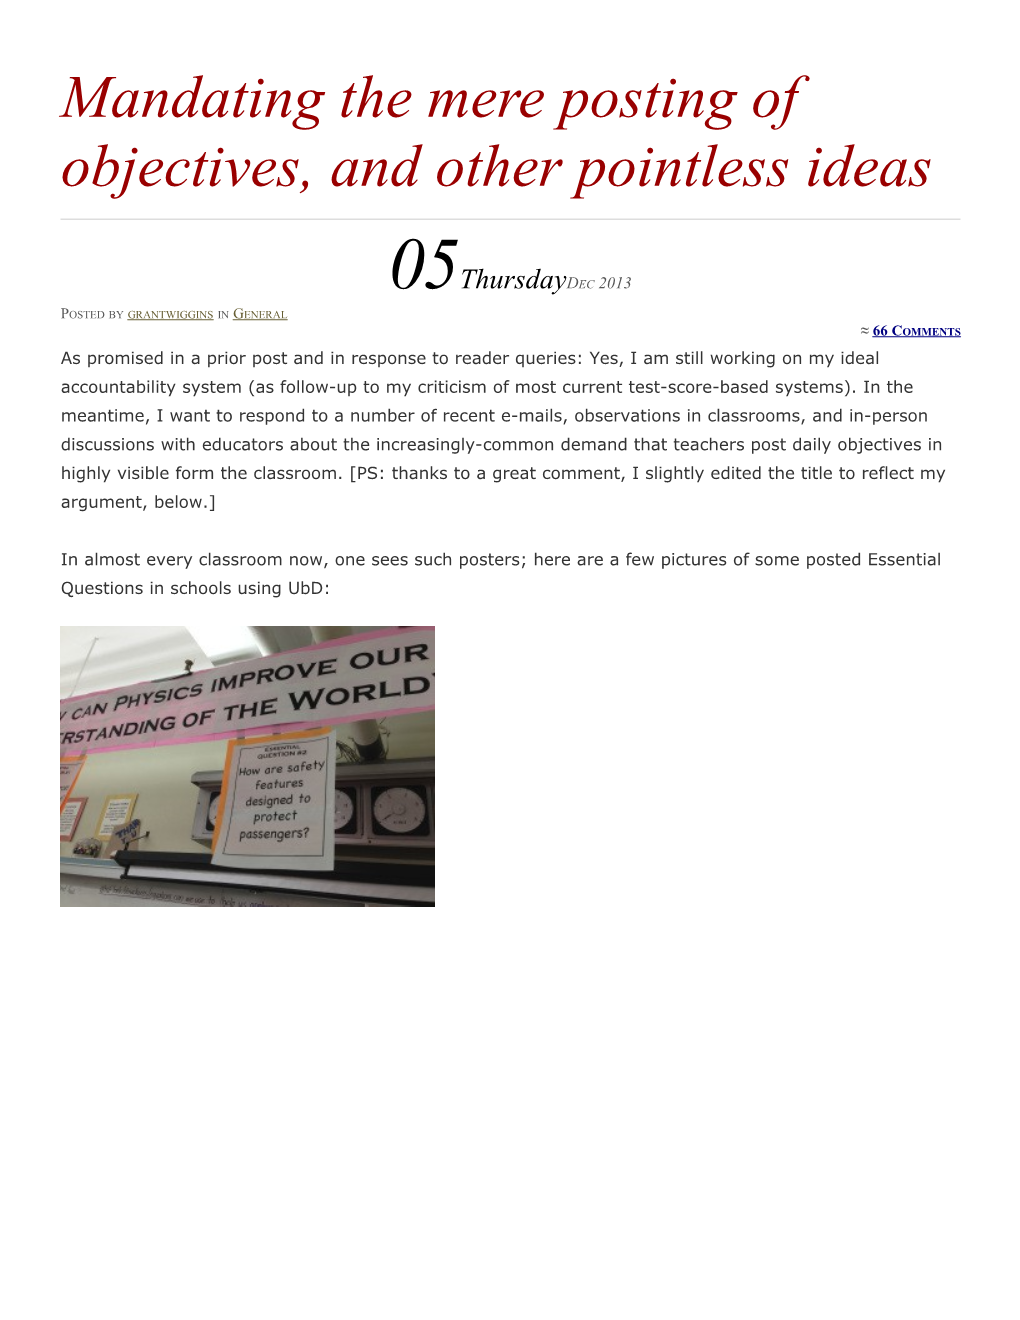 Mandating the Mere Posting of Objectives, and Other Pointlessideas